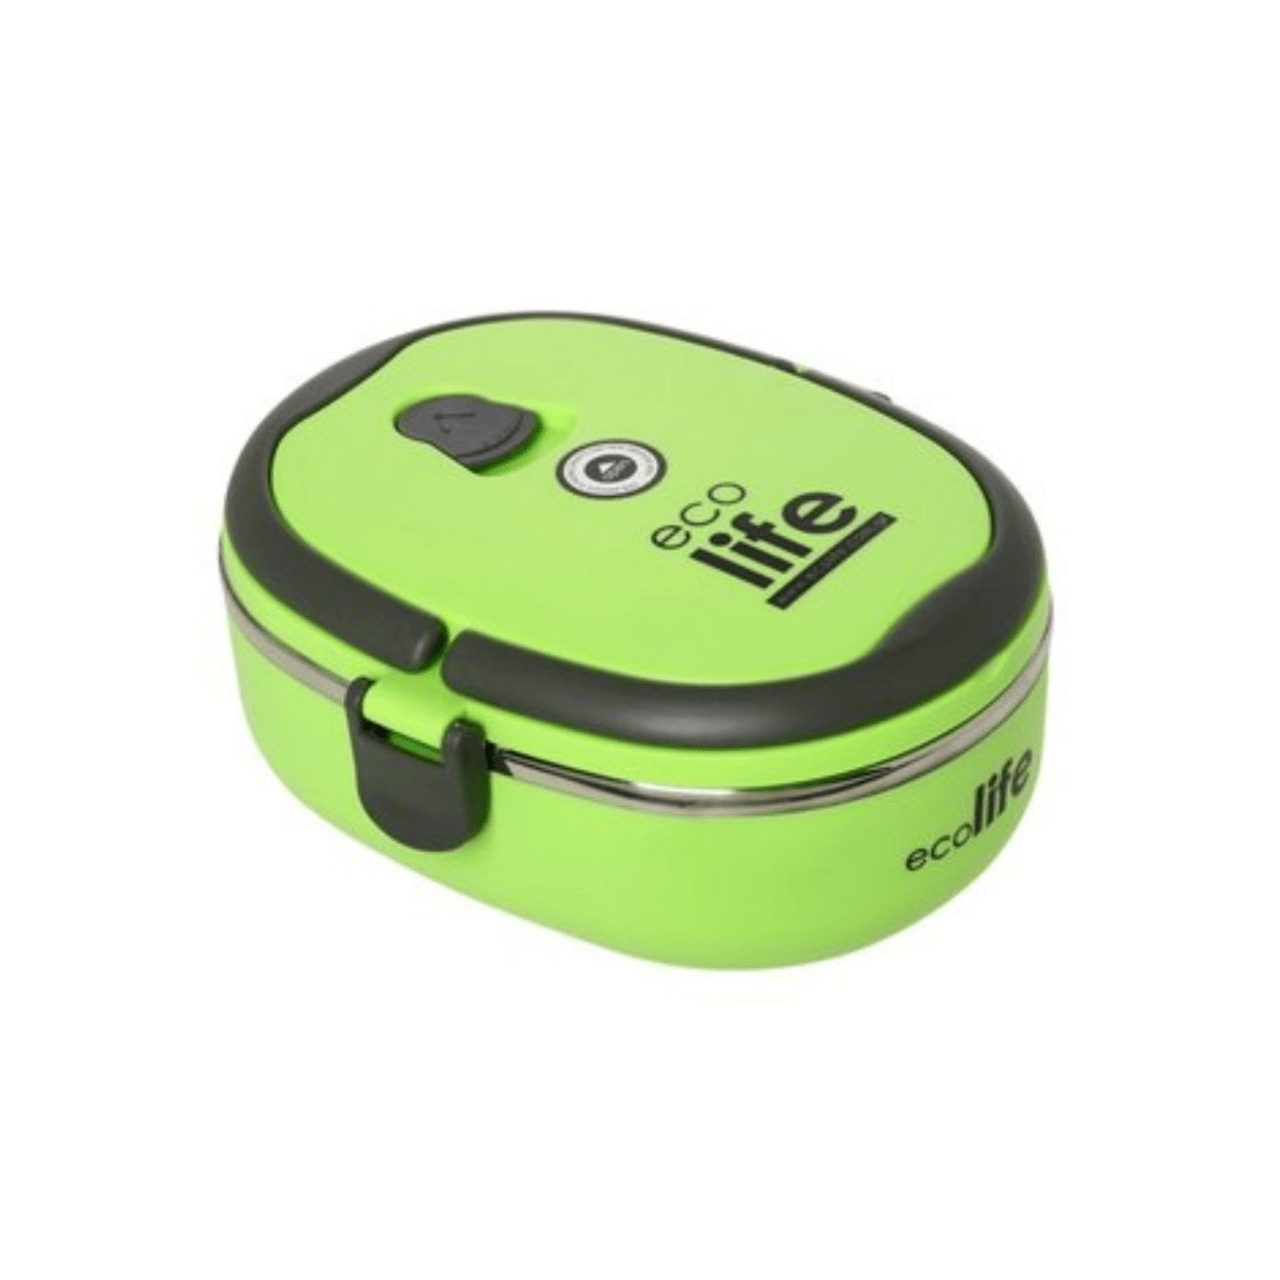 Lunch box stainless steel 800ml (green)